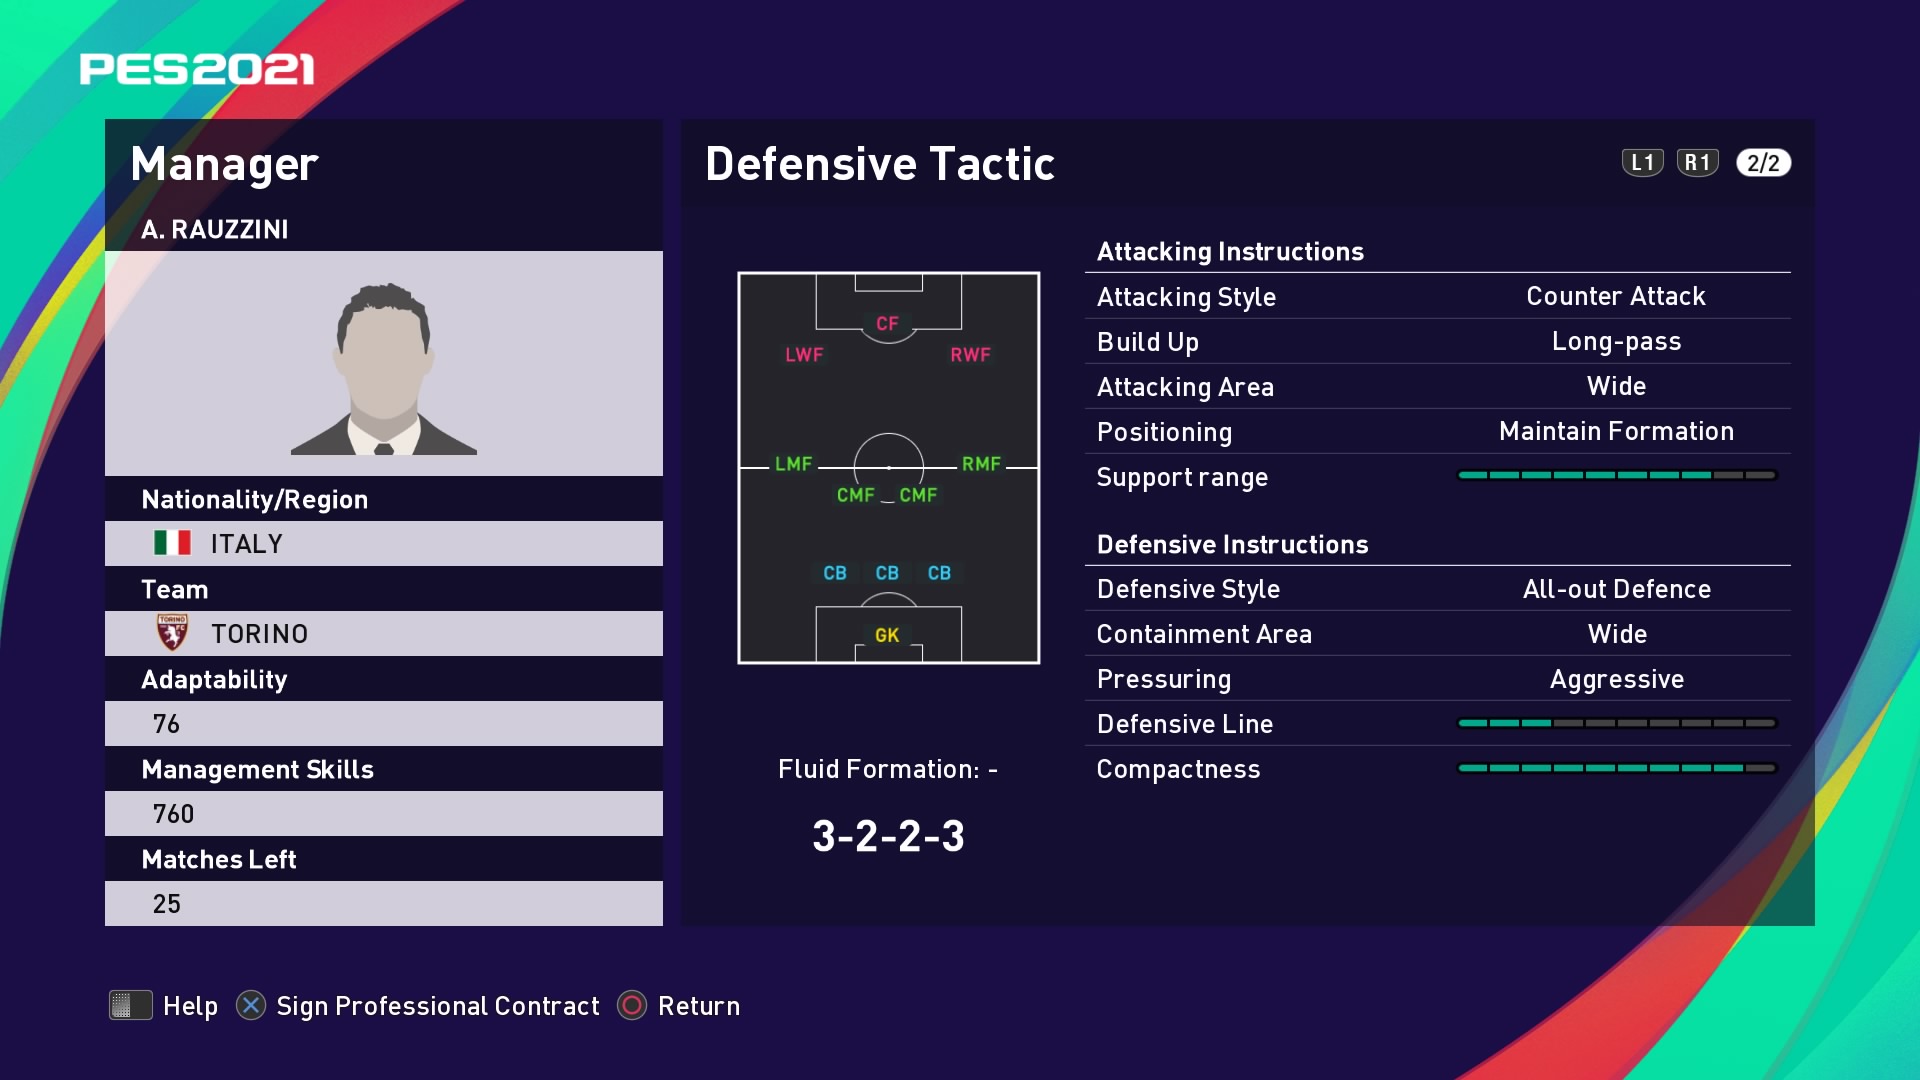 A. Rauzzini (Marco Giampaolo) Defensive Tactic in PES 2021 myClub